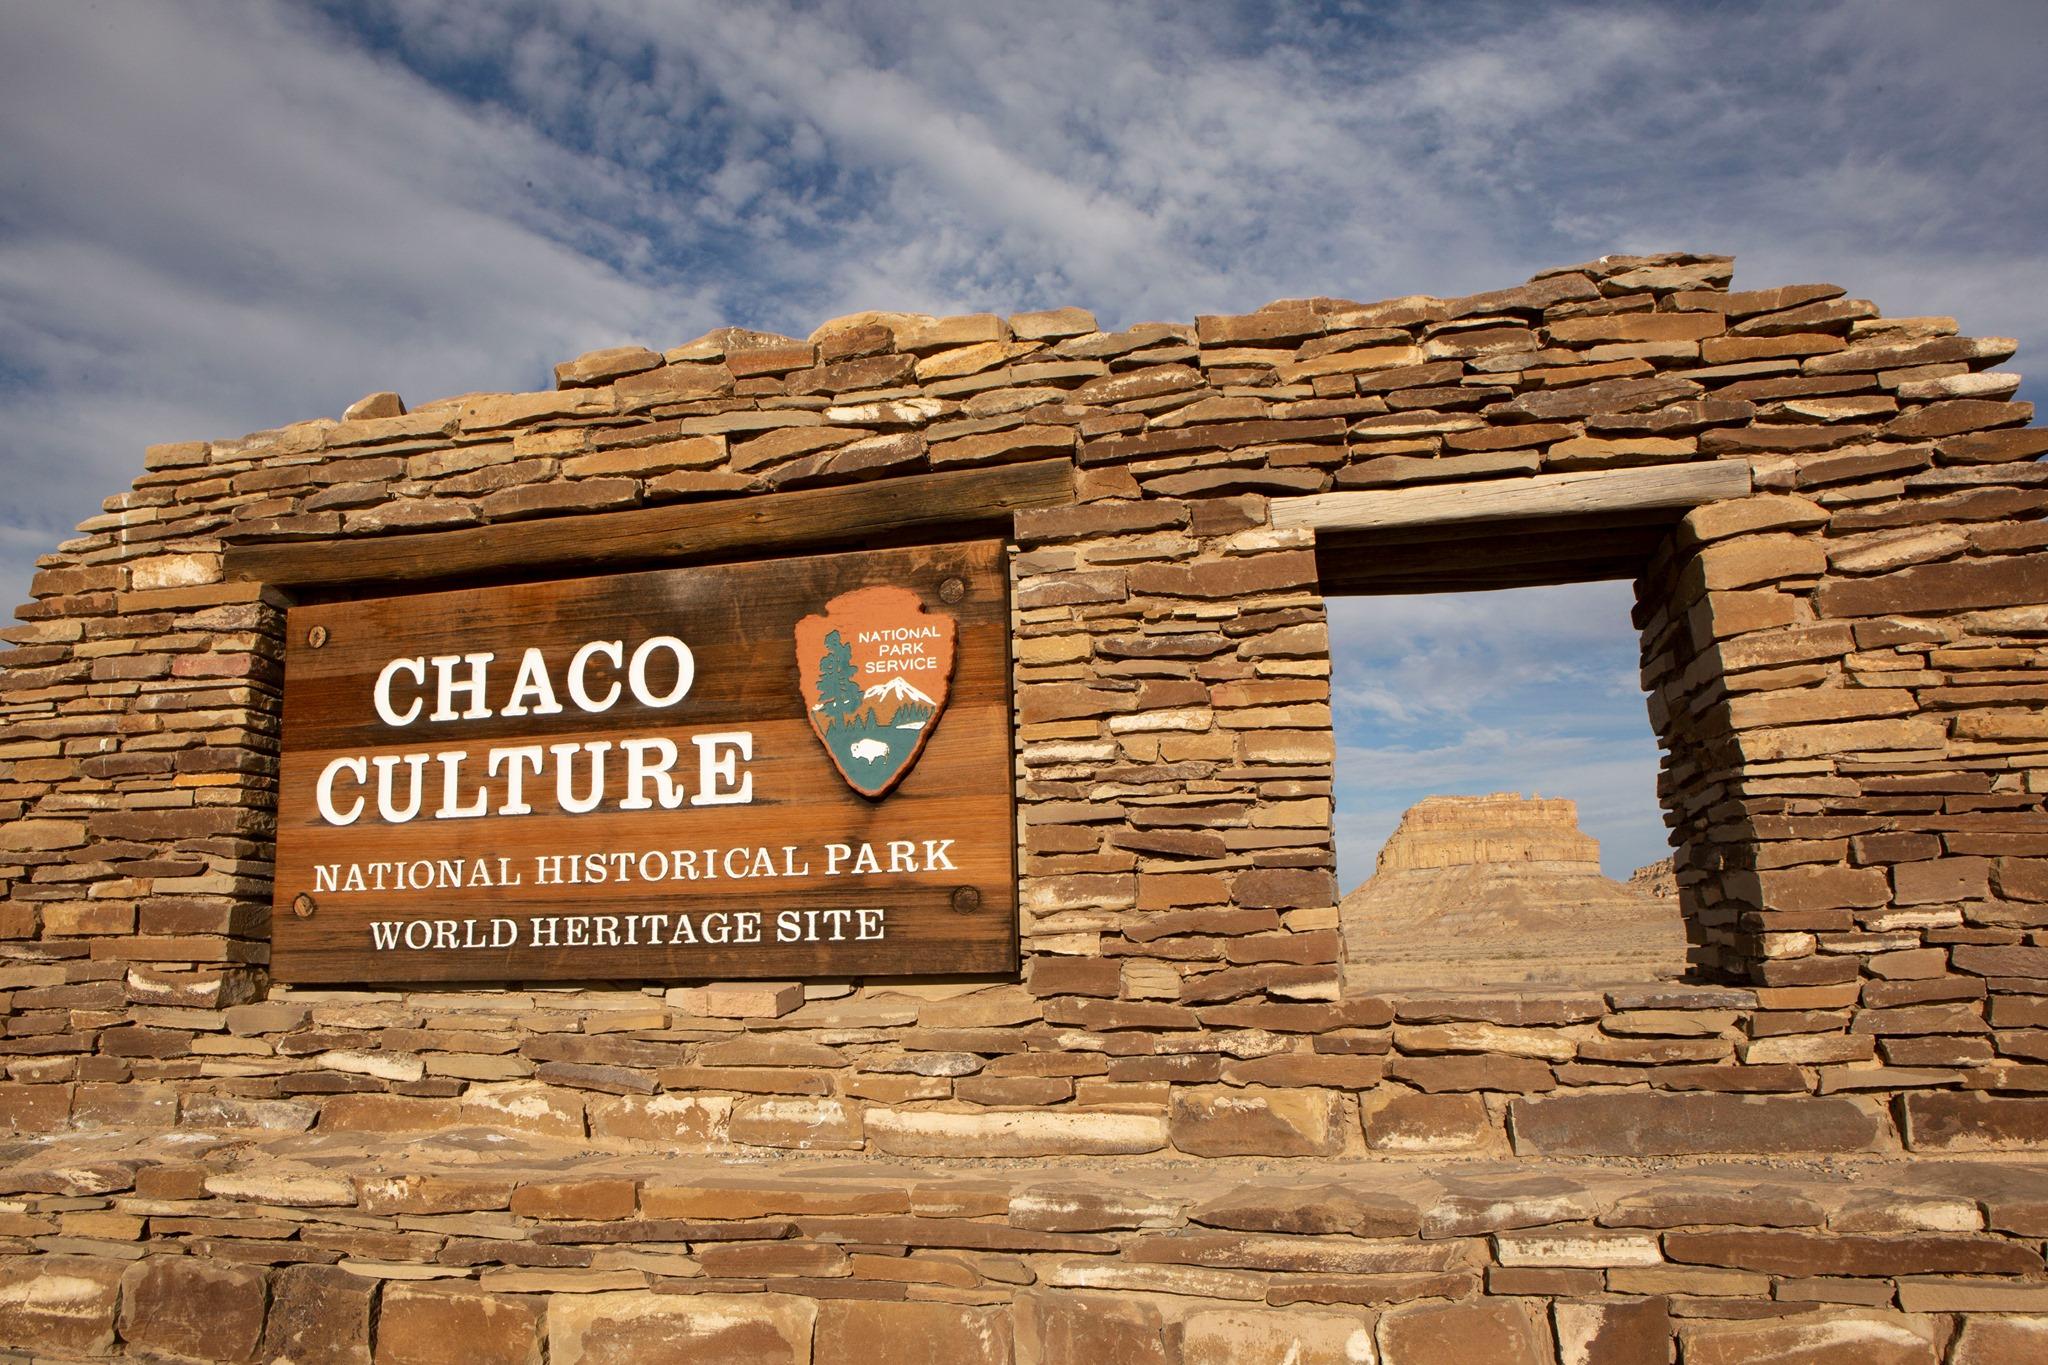 The entrance sign to Chaco Culture made out of sandstone and showing Fajada Butte through a window.